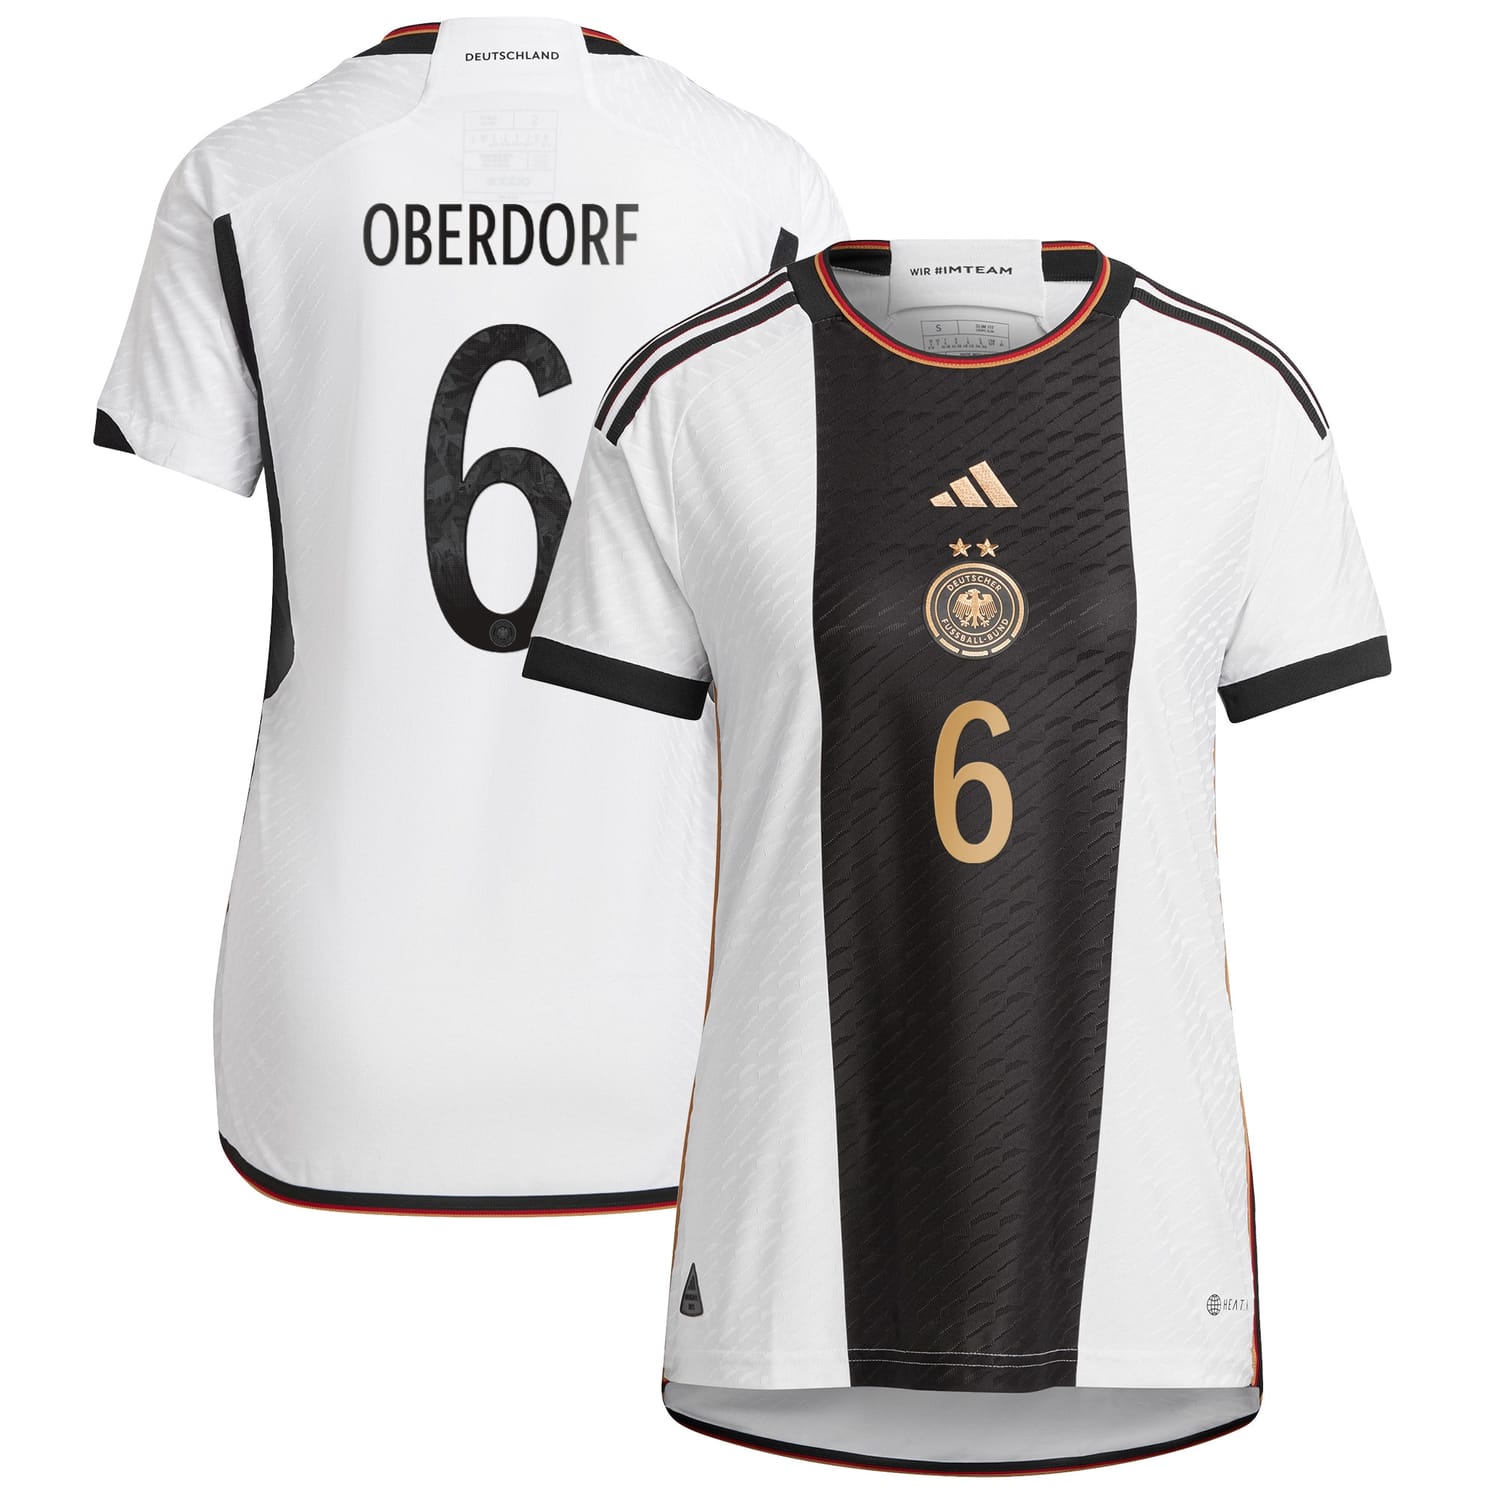 Germany National Team Home Authentic Jersey Shirt player Lena Oberdorf 6 printing for Women